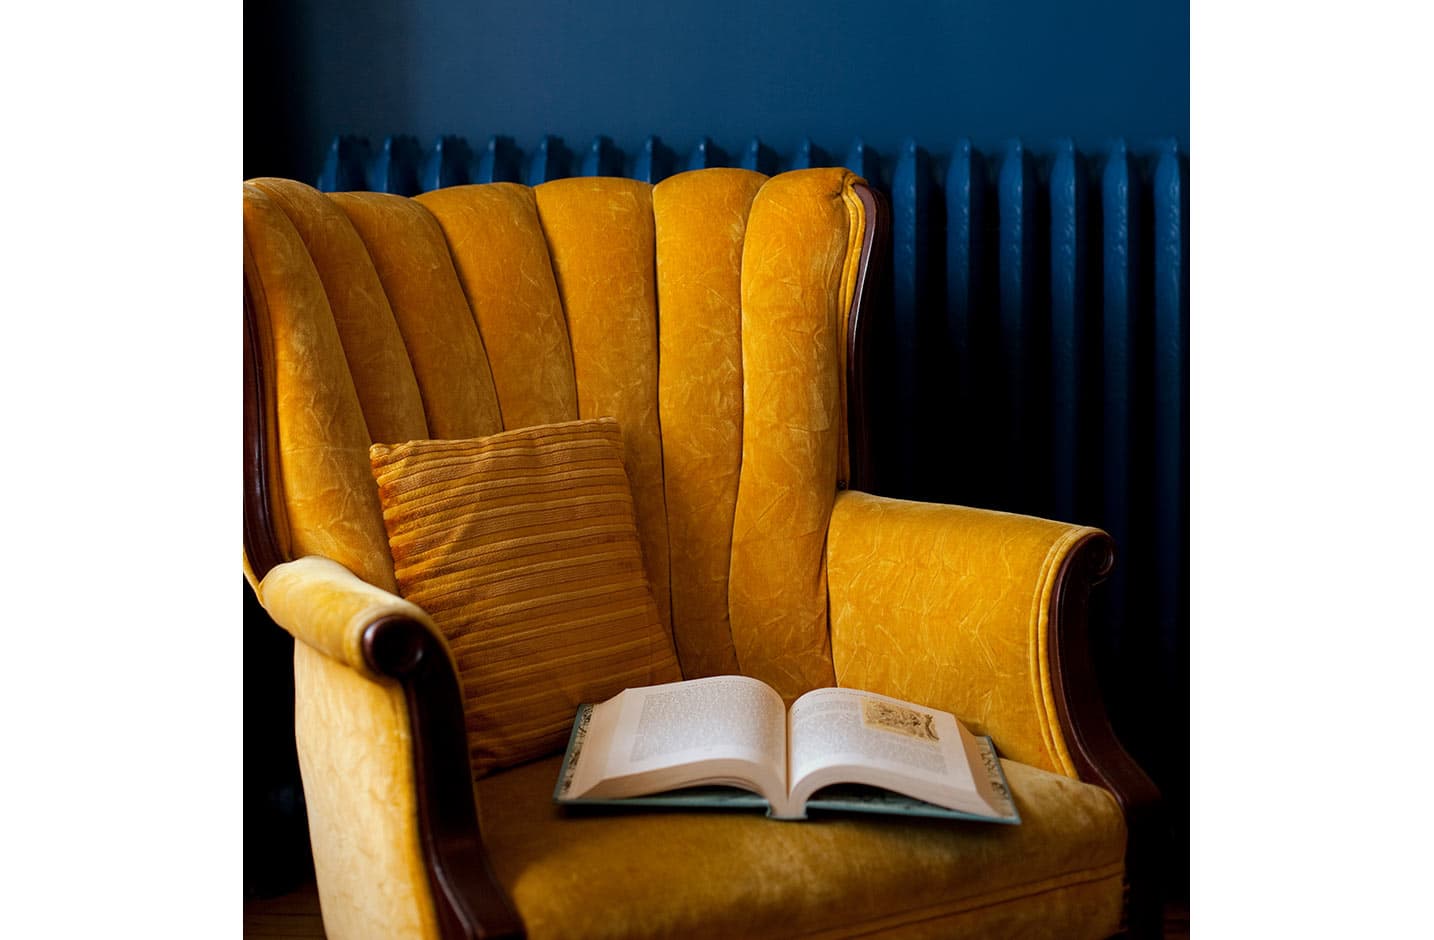 Closeup of yellow chair against blue wall, with open book